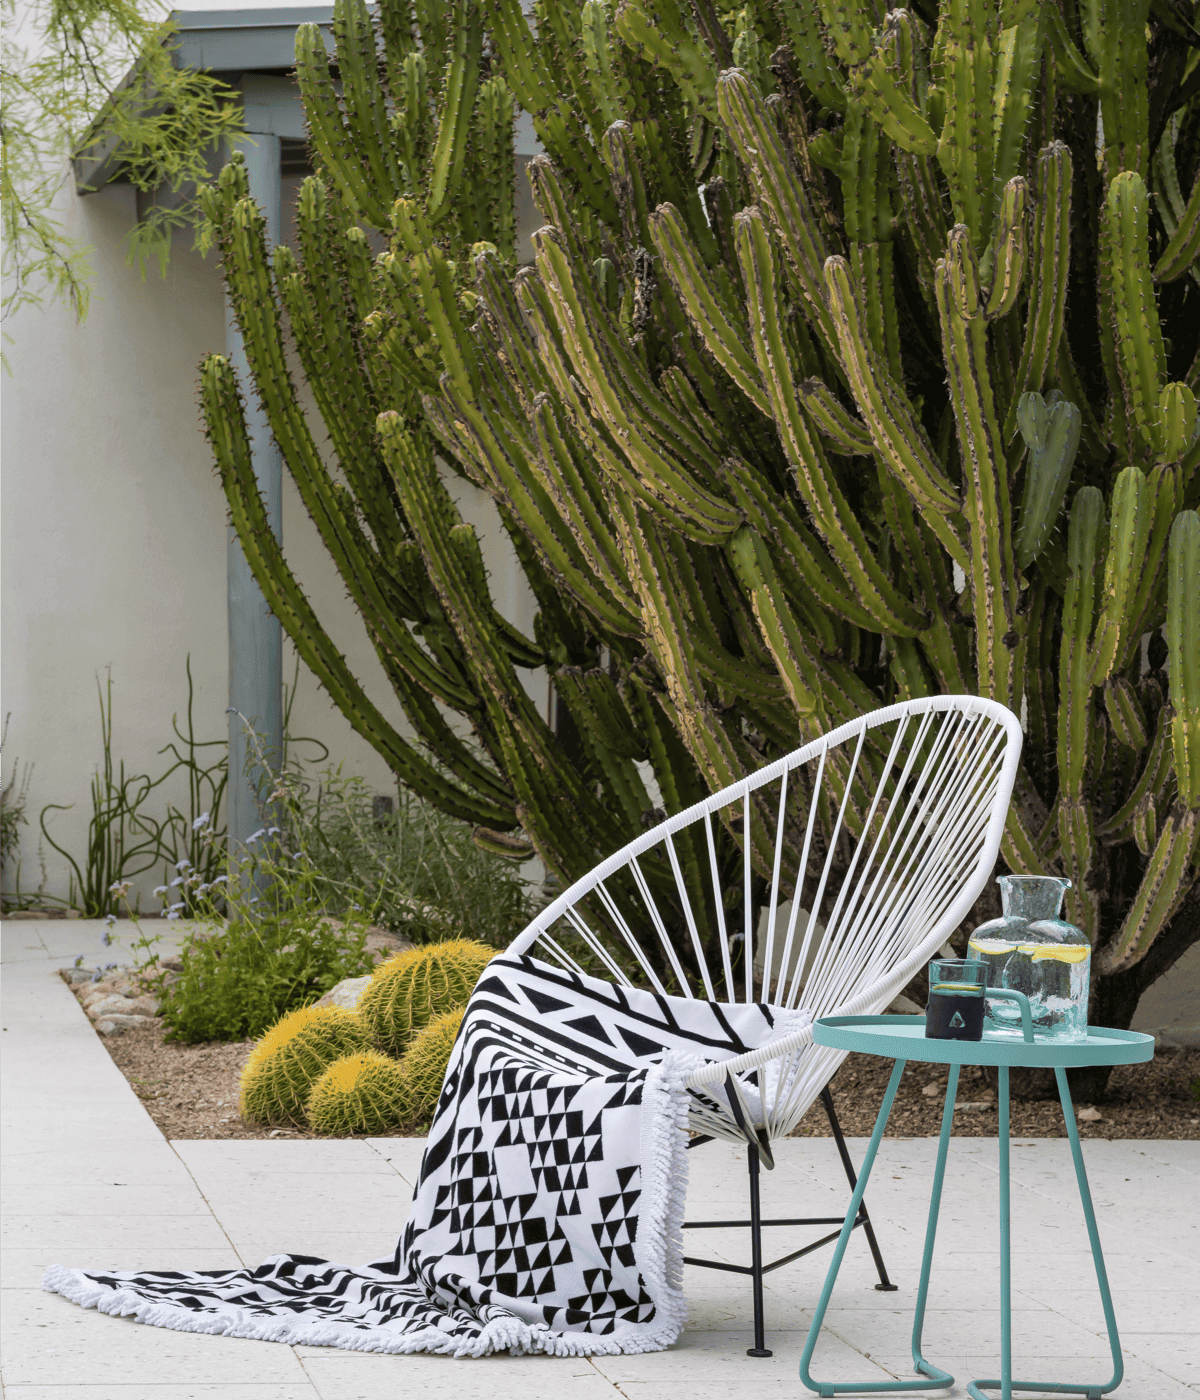 A striking modern woven chair with geometric outdoor blanket and torquoise side table.